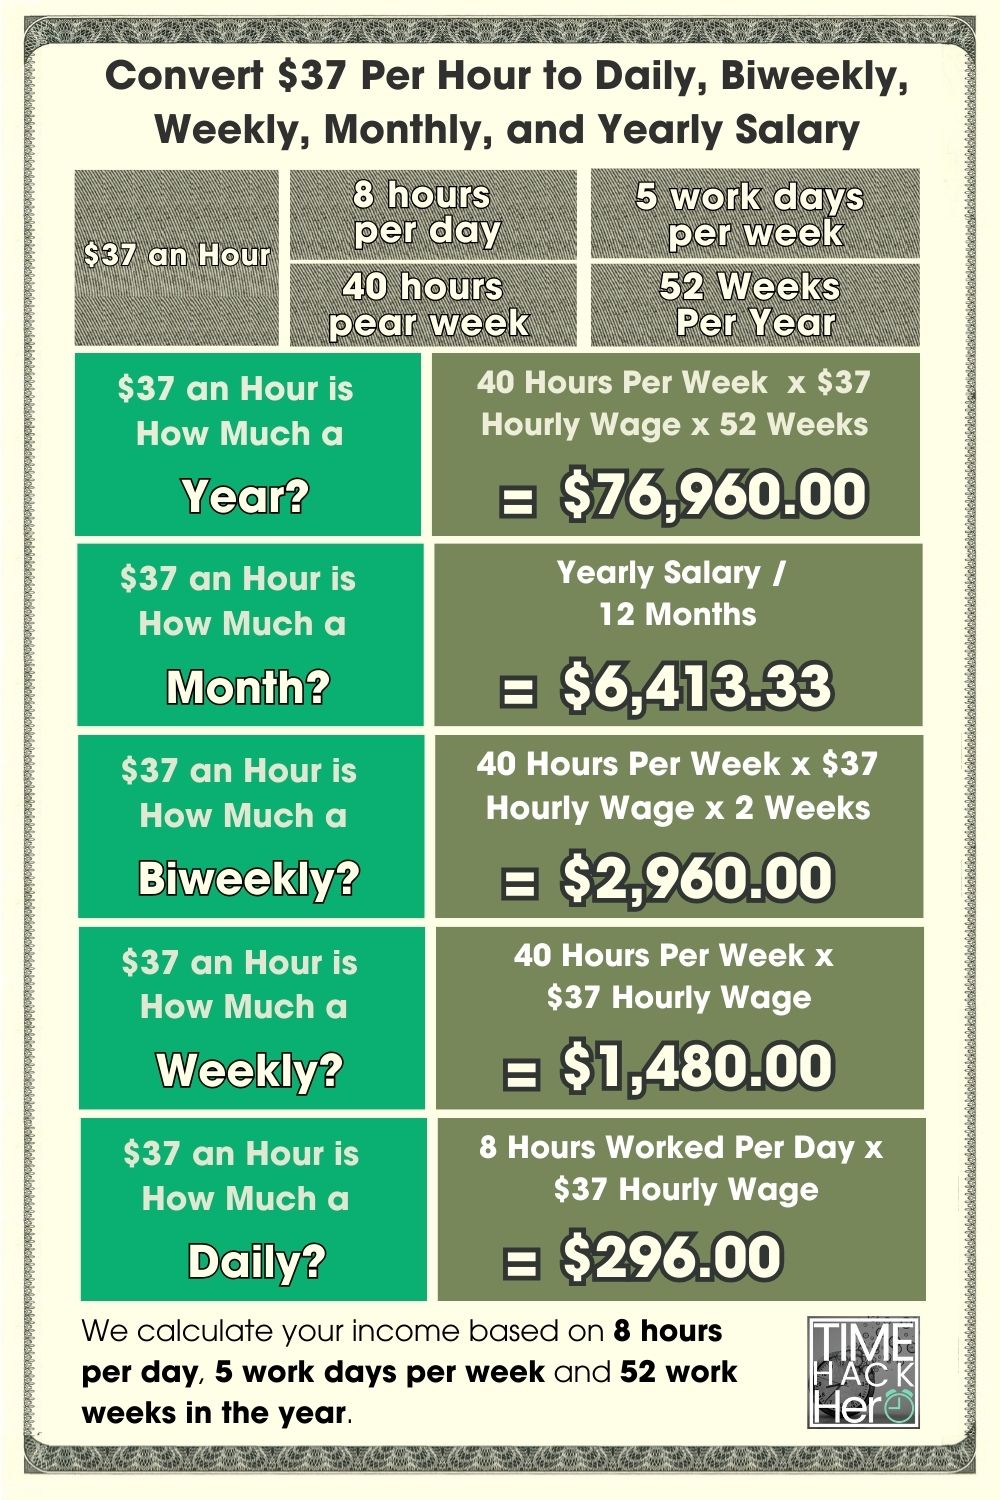 Convert $37 Per Hour to Daily, Biweekly, Weekly, Monthly, and Yearly Salary